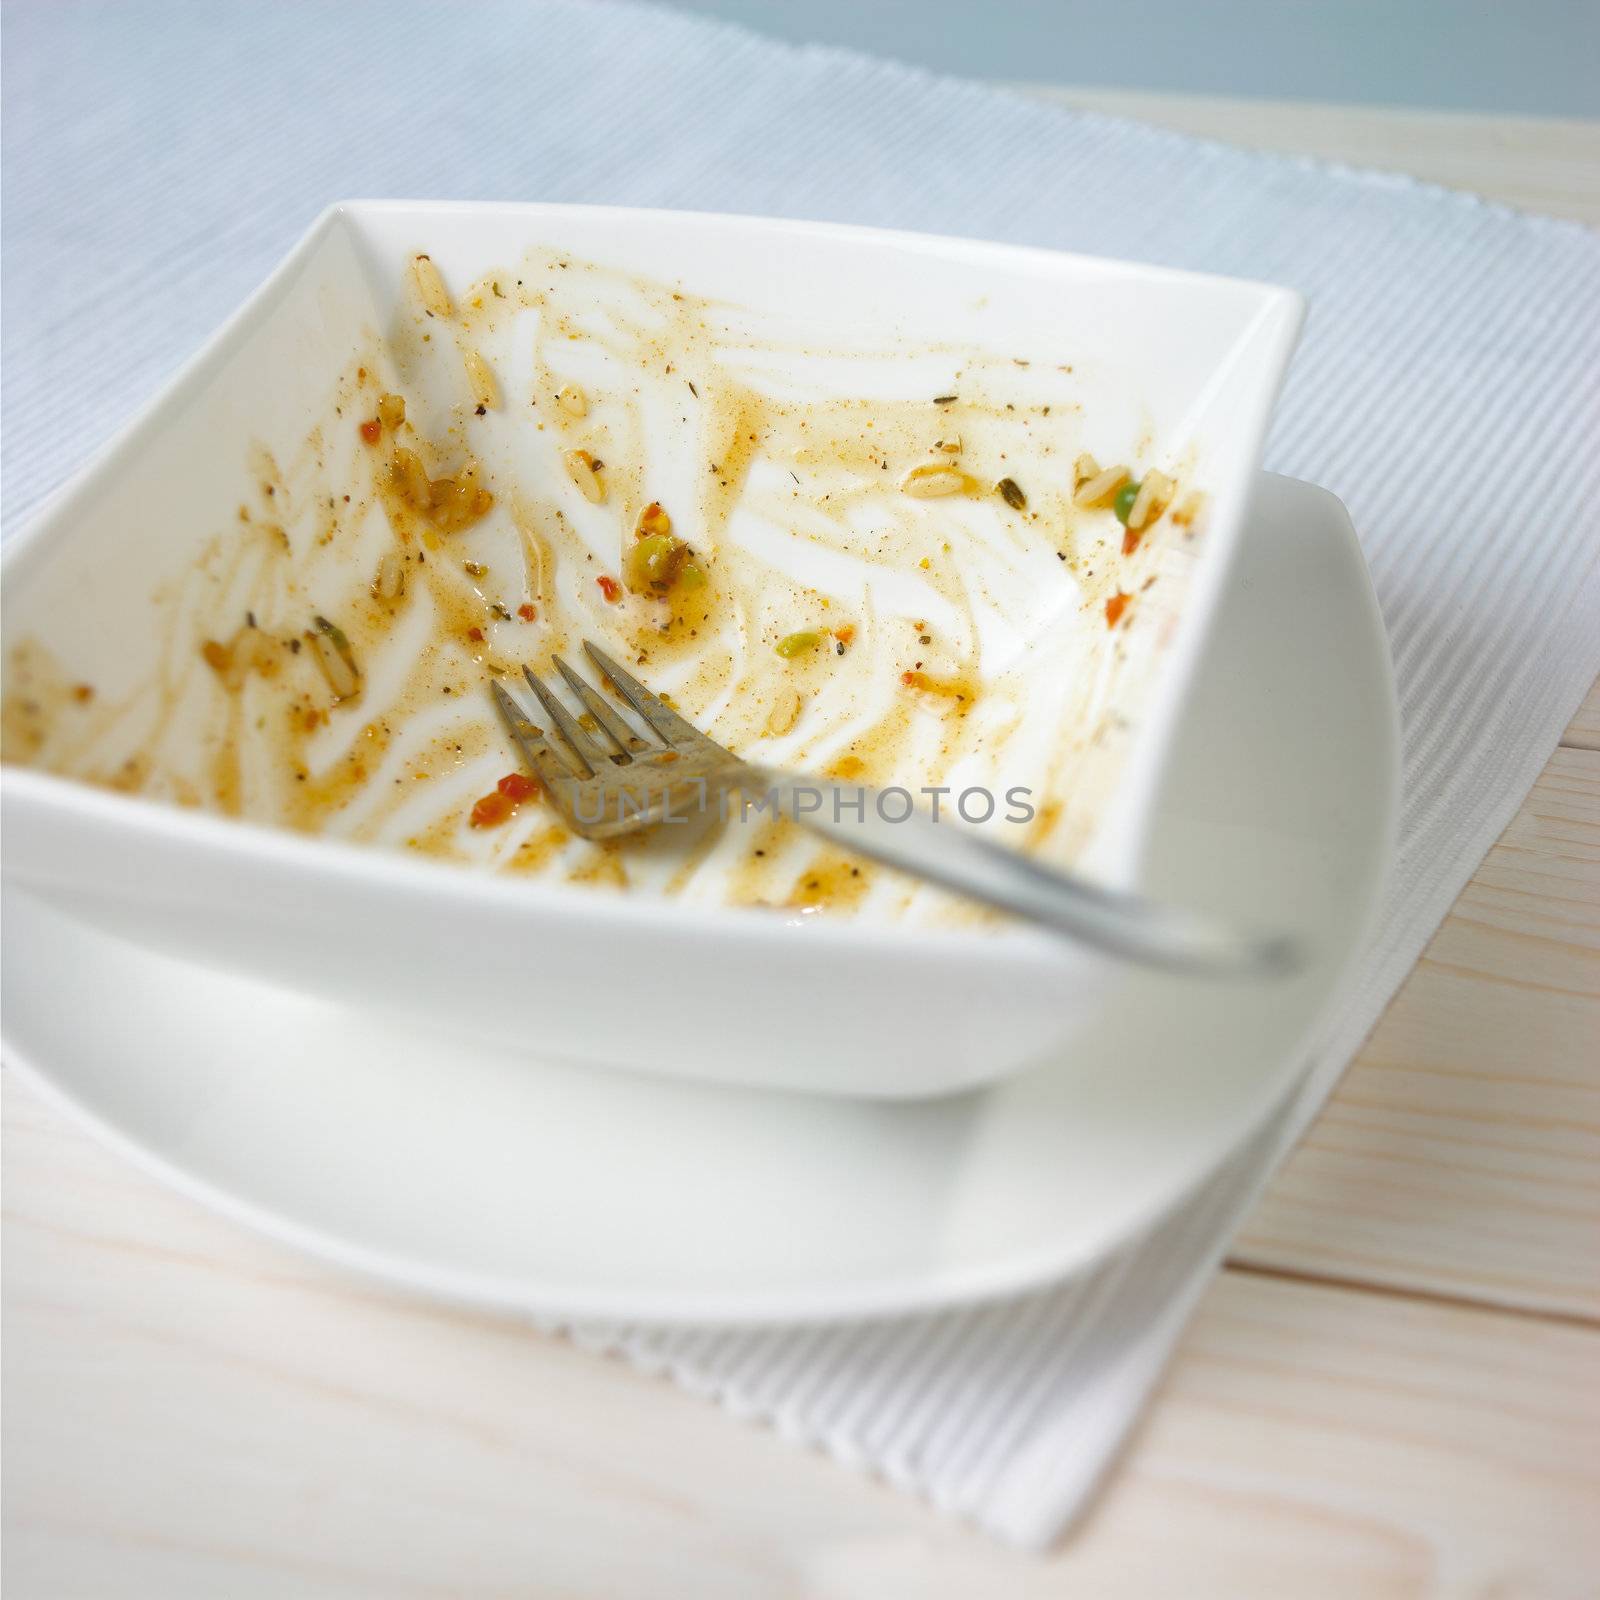 empty dirty plate after food